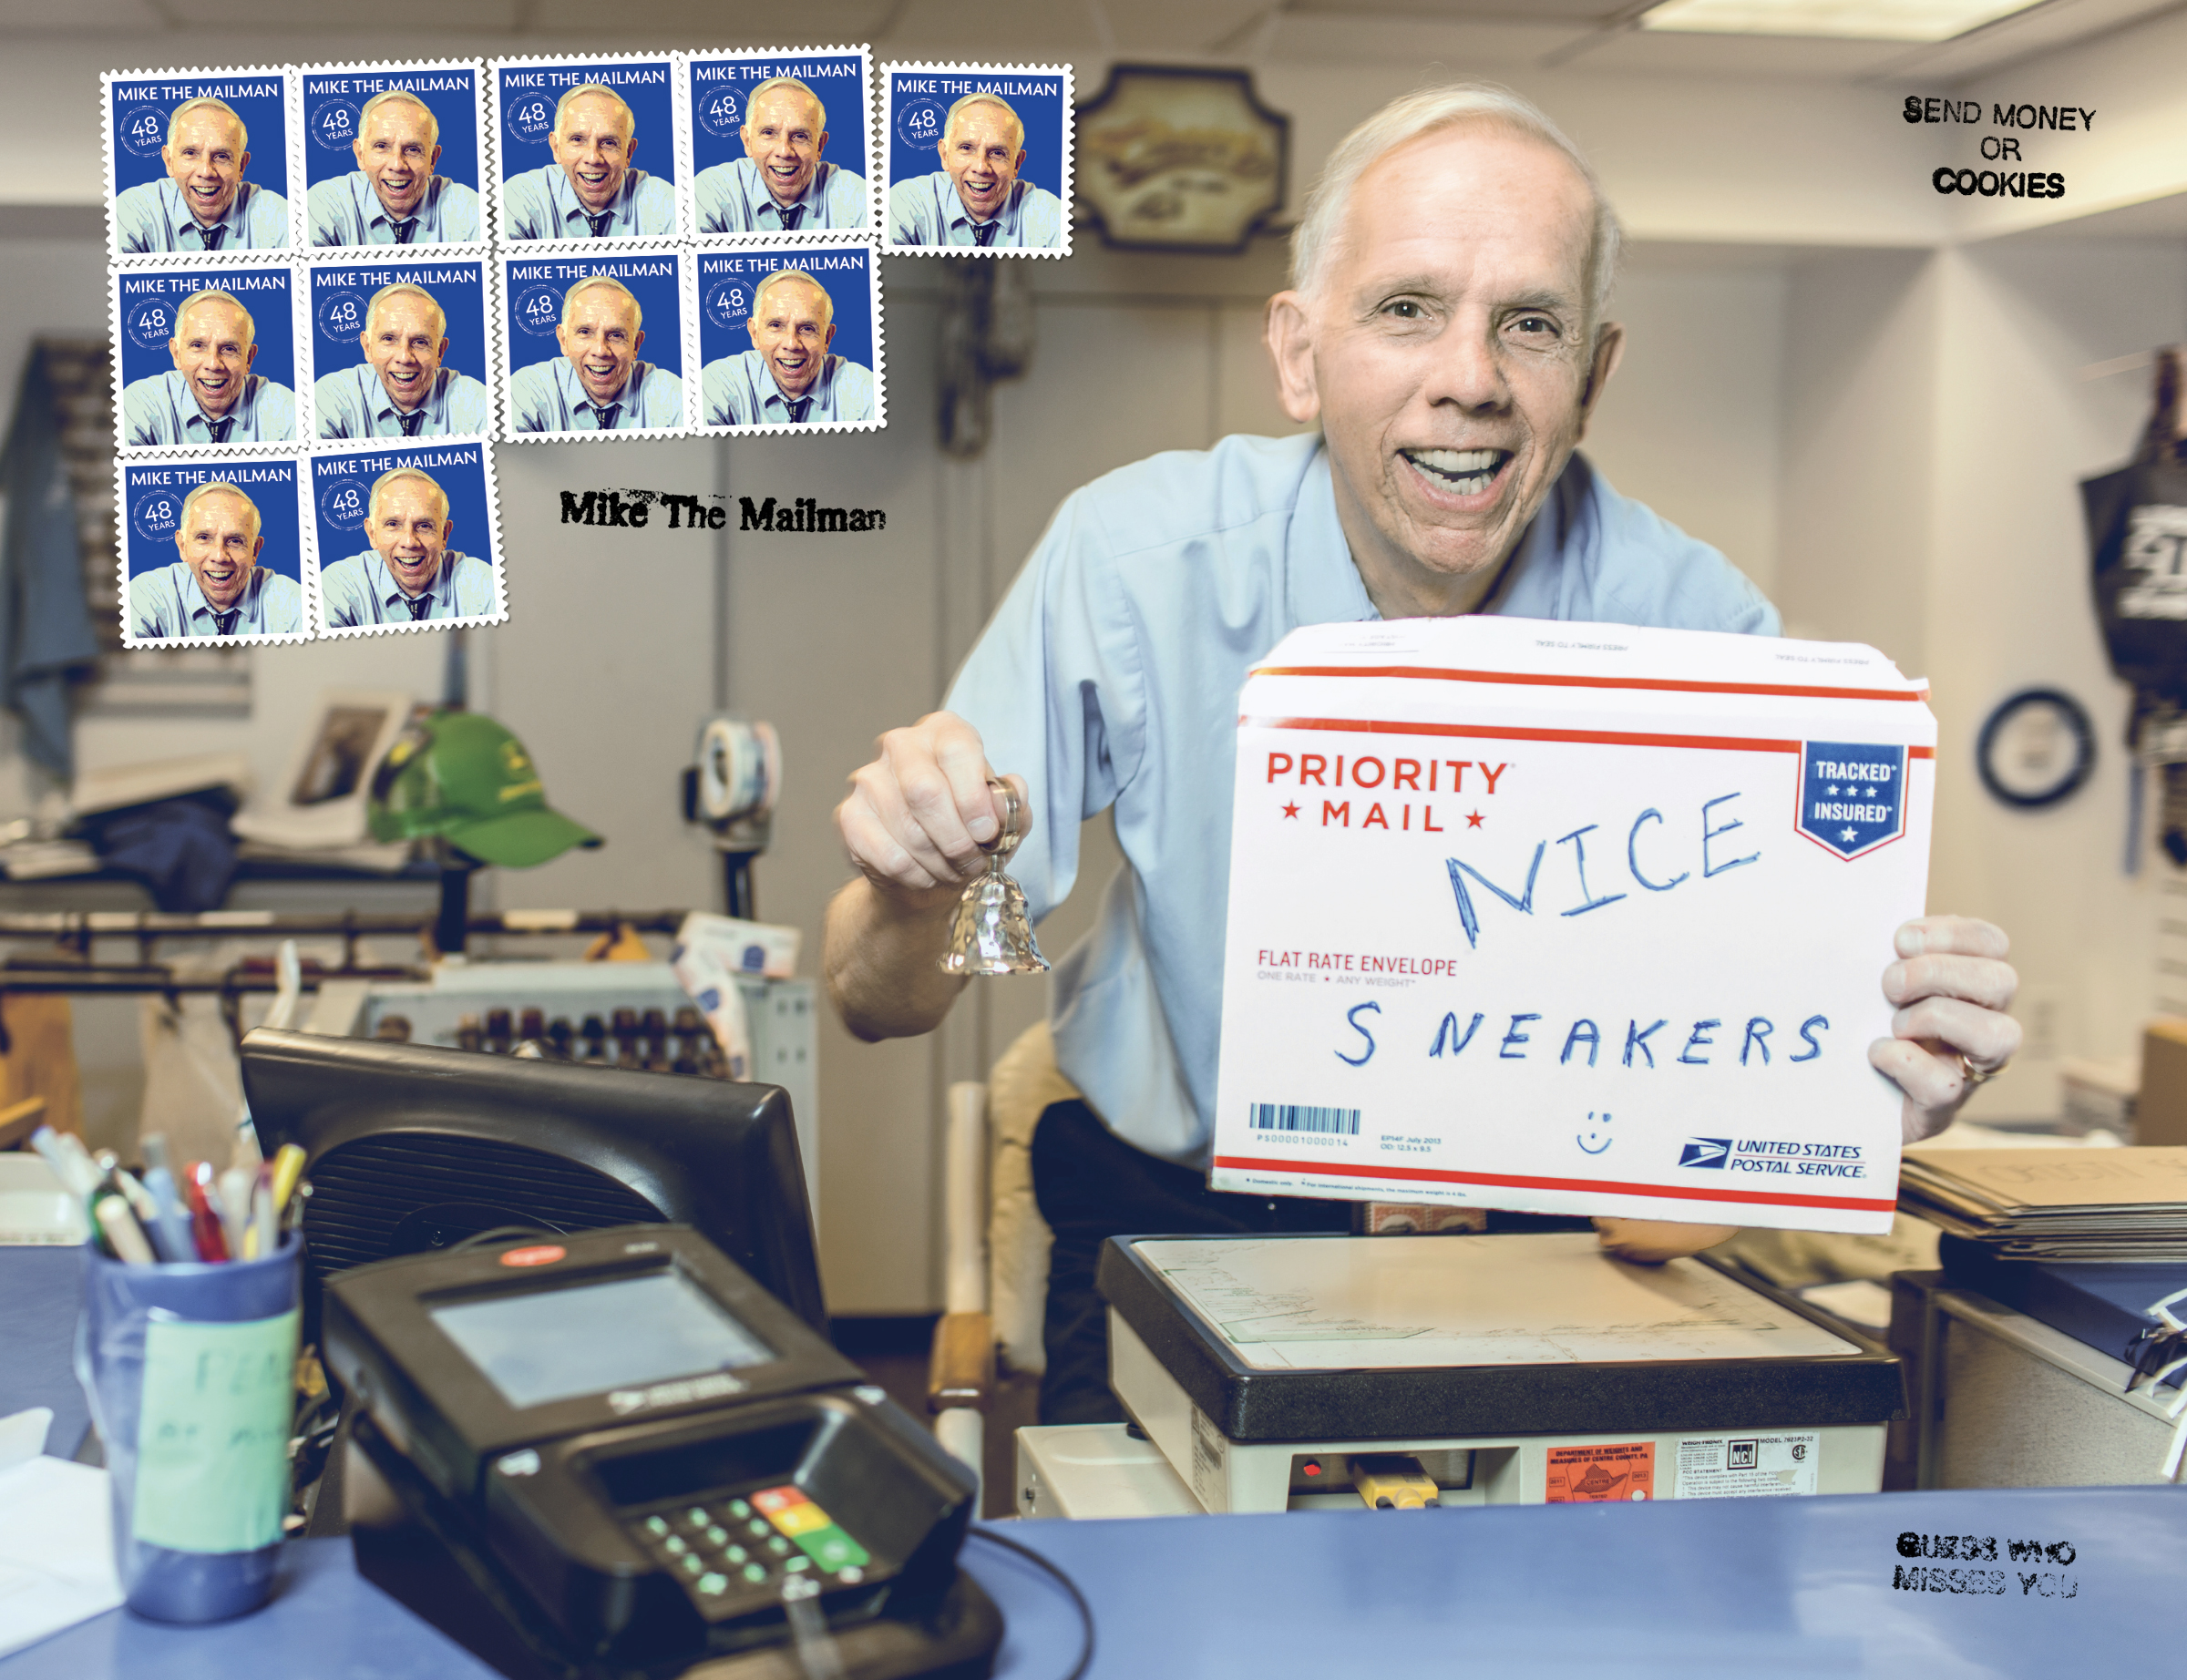 Mike "The Mailman" Herr in the mailroom holding up a sign that says Nice Sneakers and ringing a small bell 